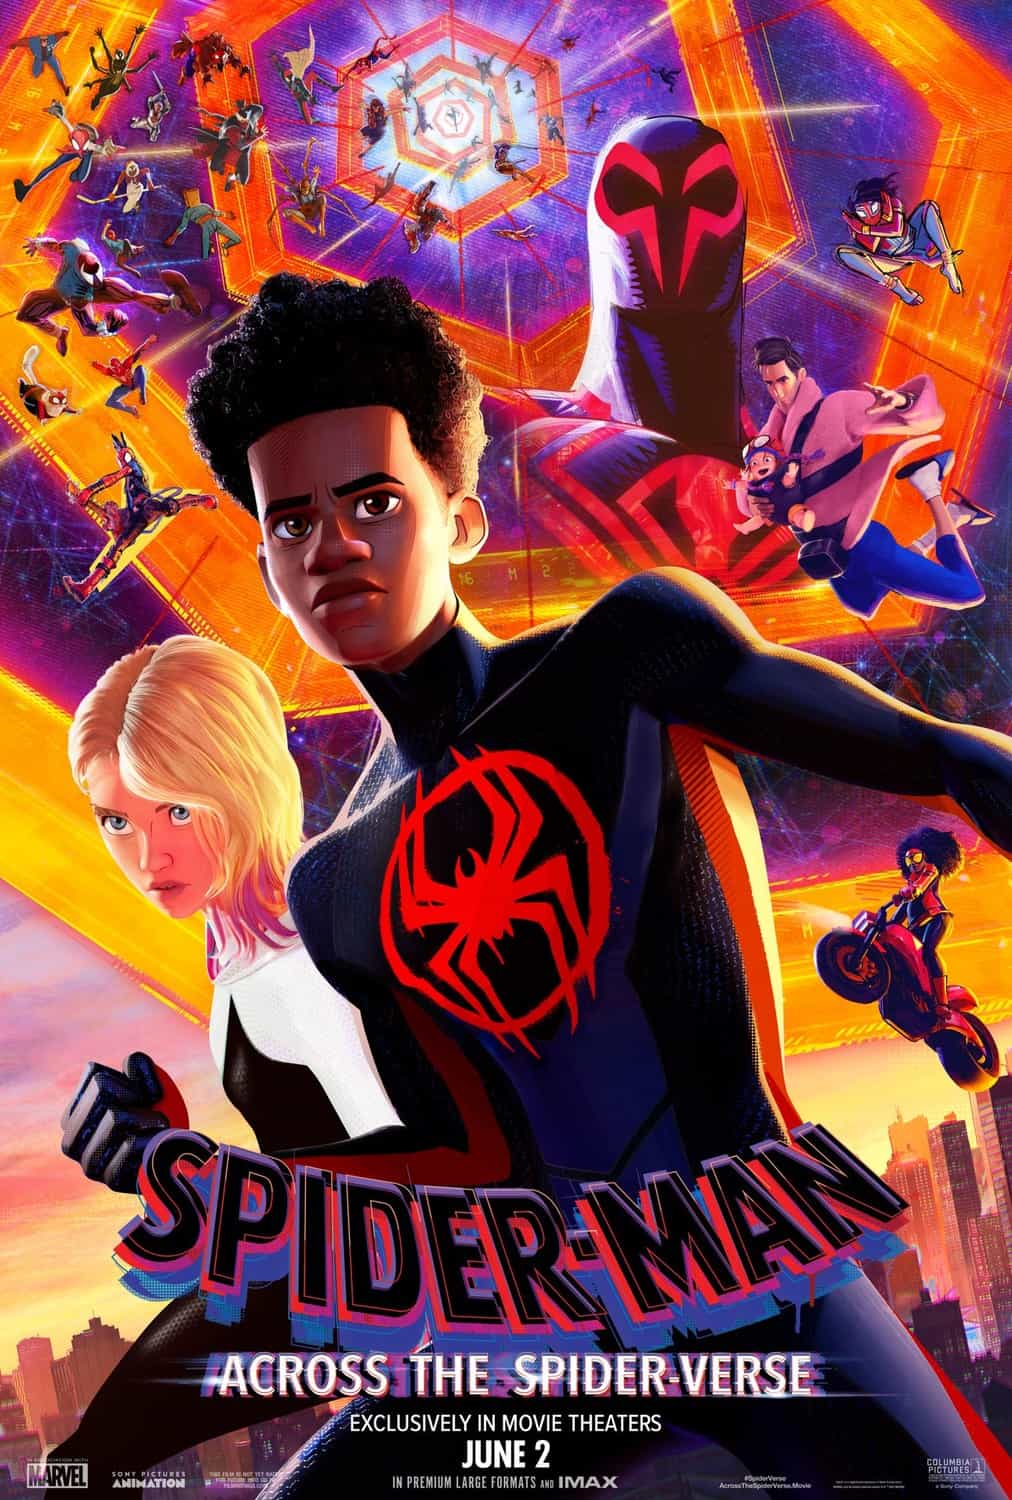 US Box Office Weekend Report 2nd - 4th June 2023:  Spider-Man: Across the Spider-Verse tops the North American box office with an amazing debut over $120 Million